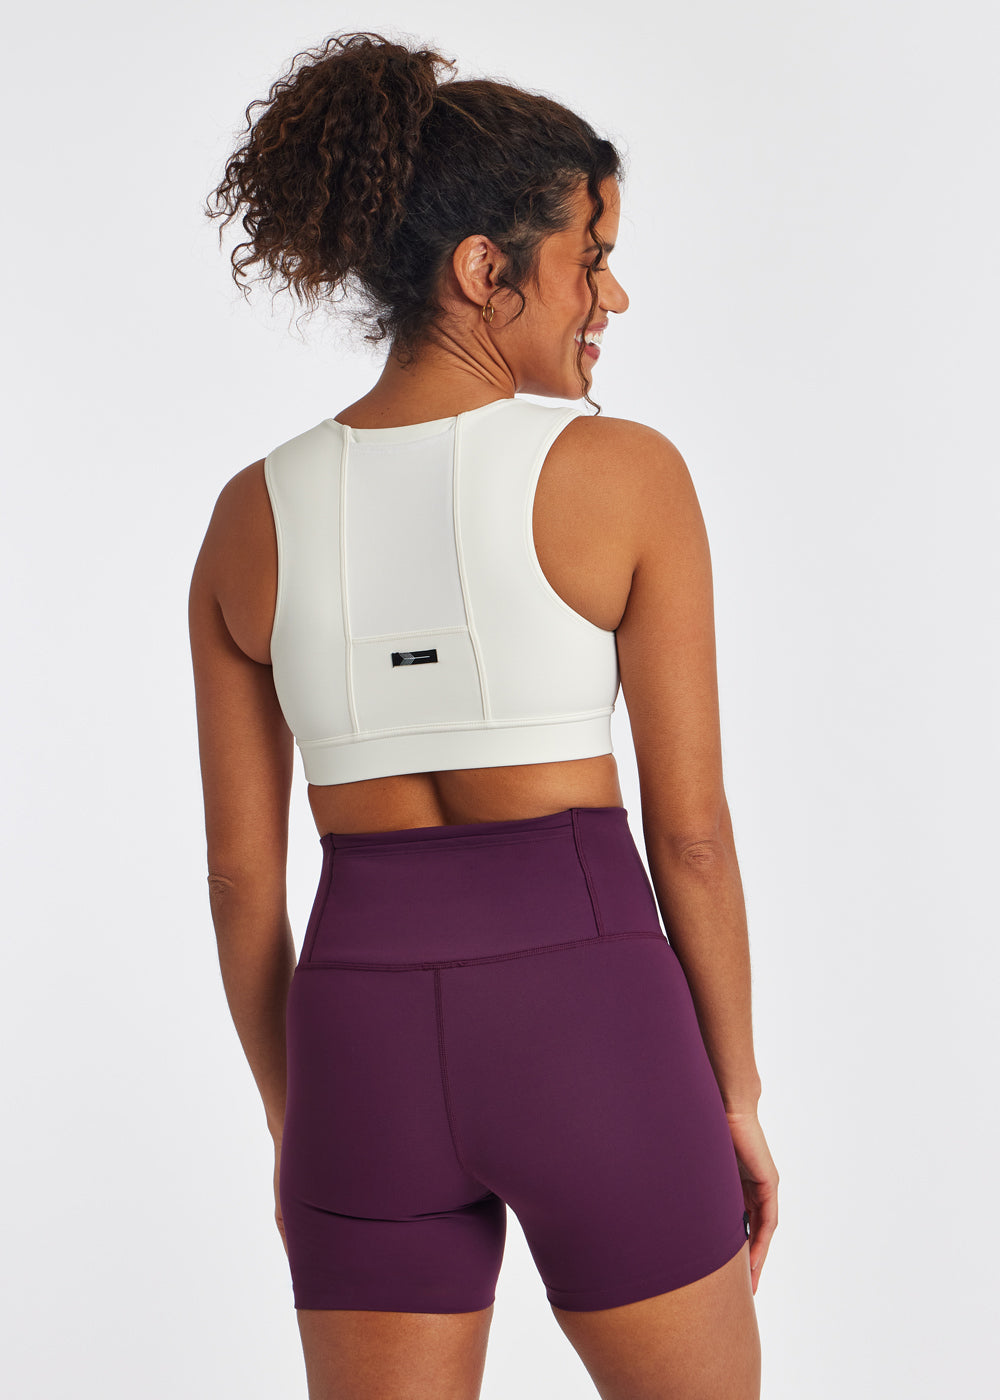 Lululemon Speed Up Sports Bra Review  A Simple, Supportive Racerback  Favorite